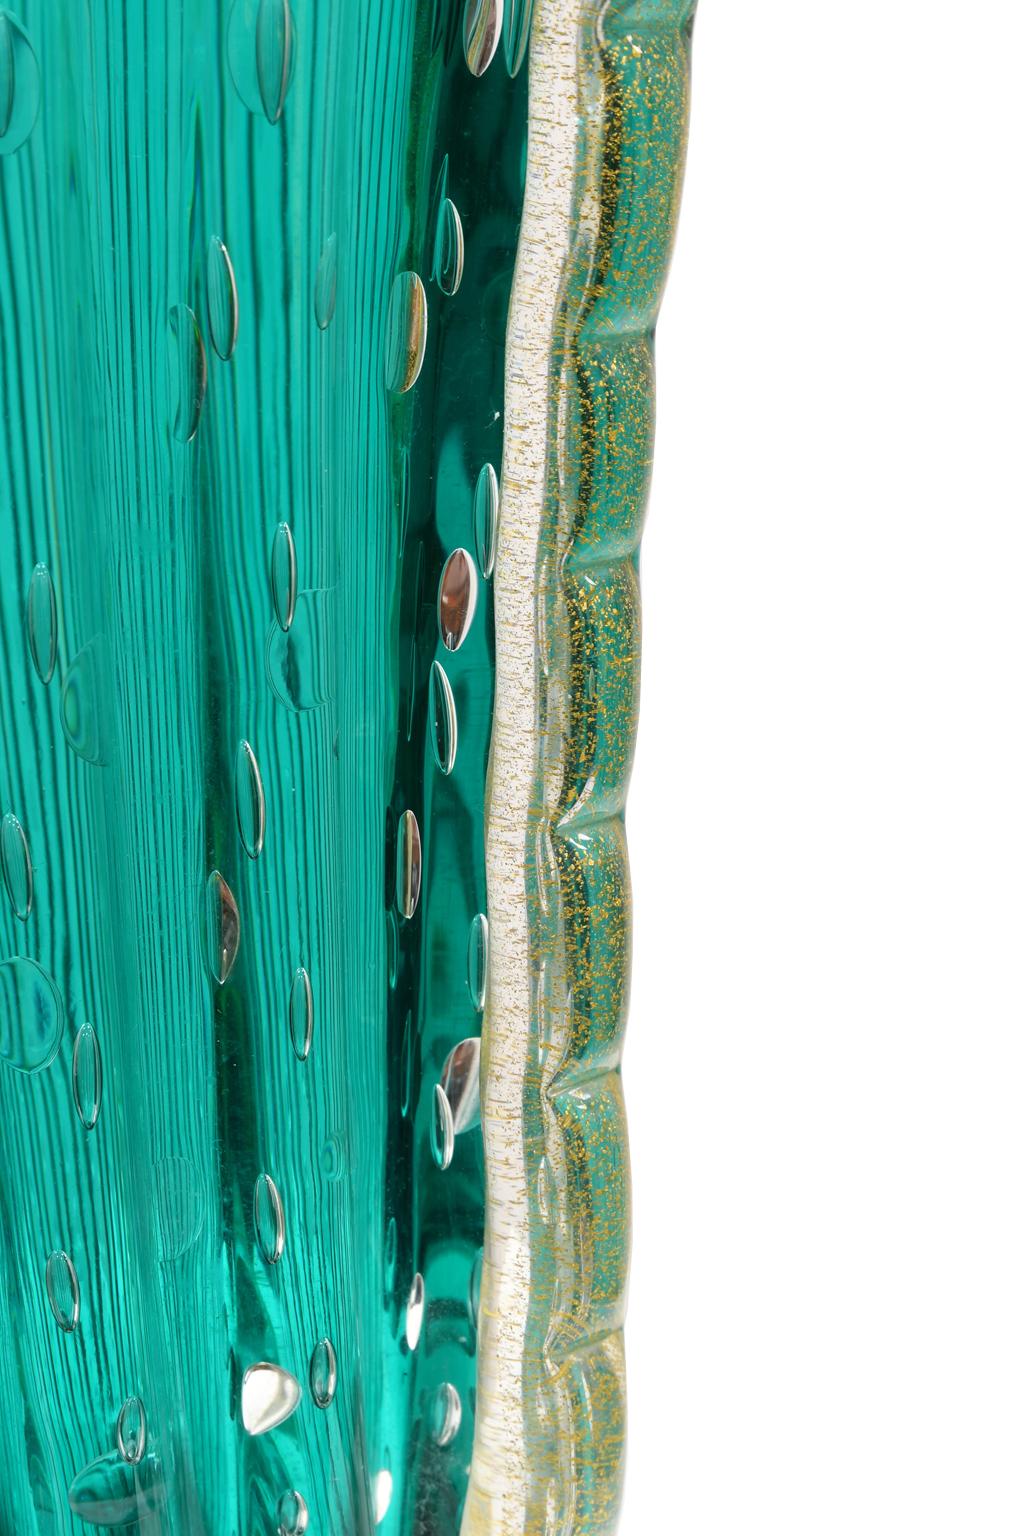 Murano Glass Teal-Colored Vase from the Workshop of Archimede Seguso Dated 1999 1